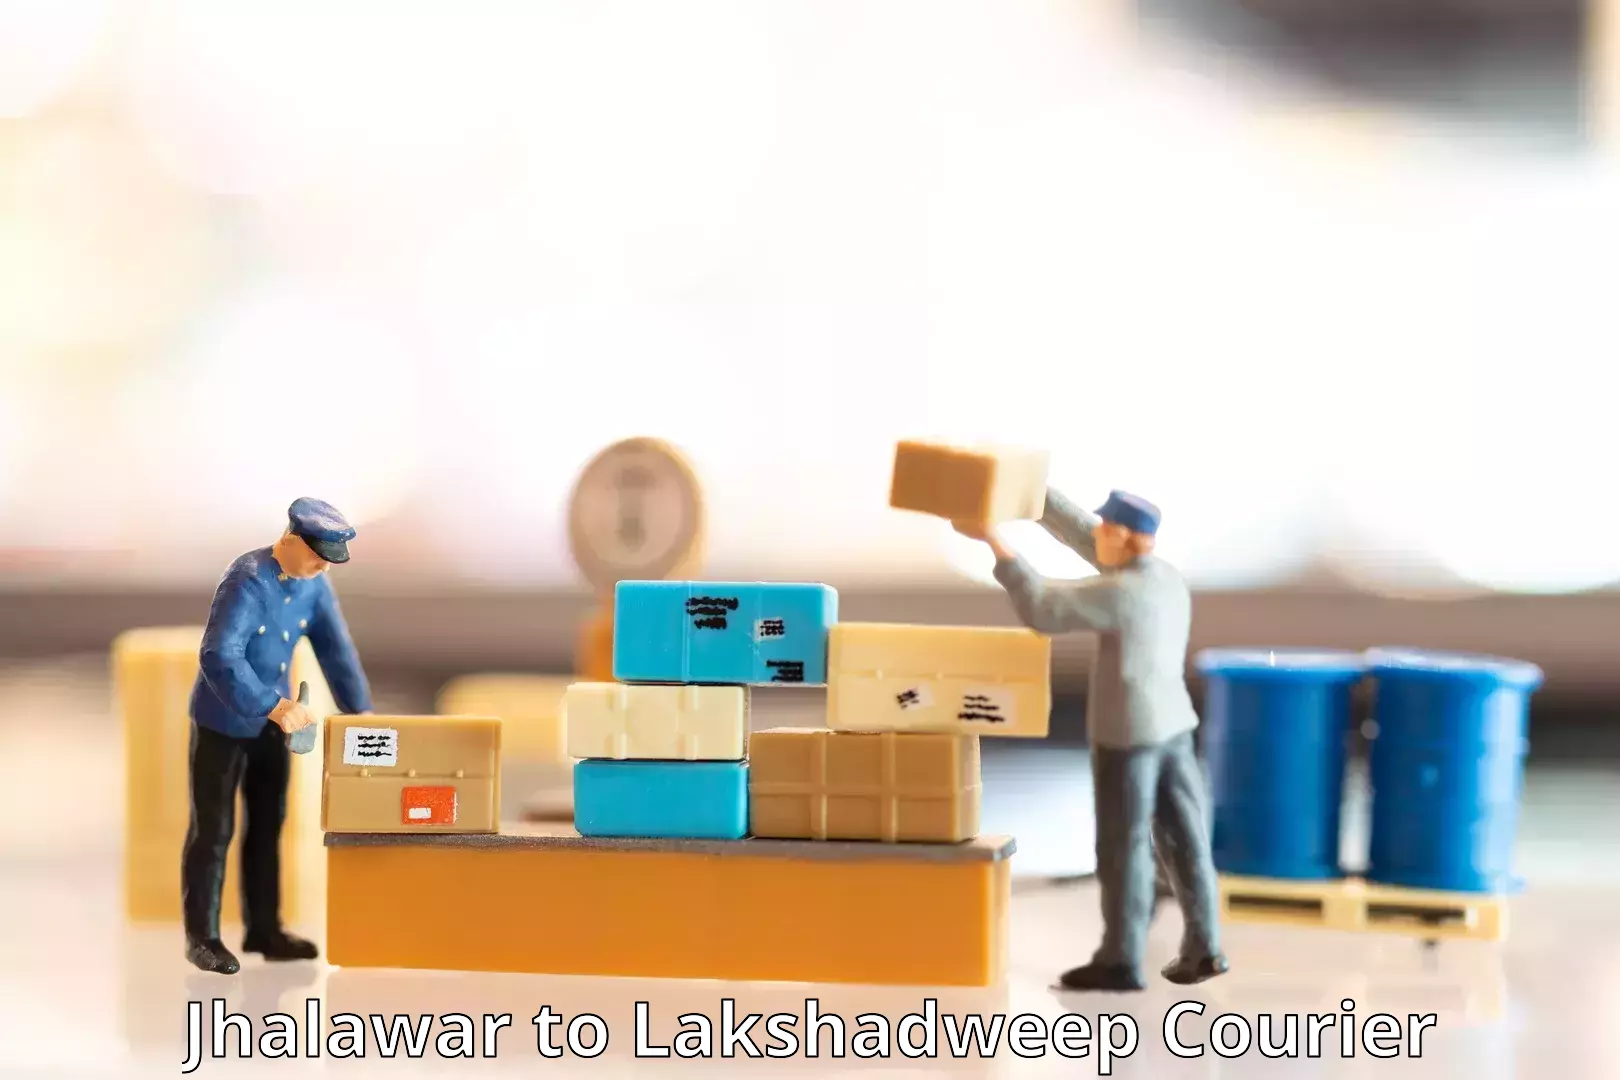 Next-day delivery options Jhalawar to Lakshadweep